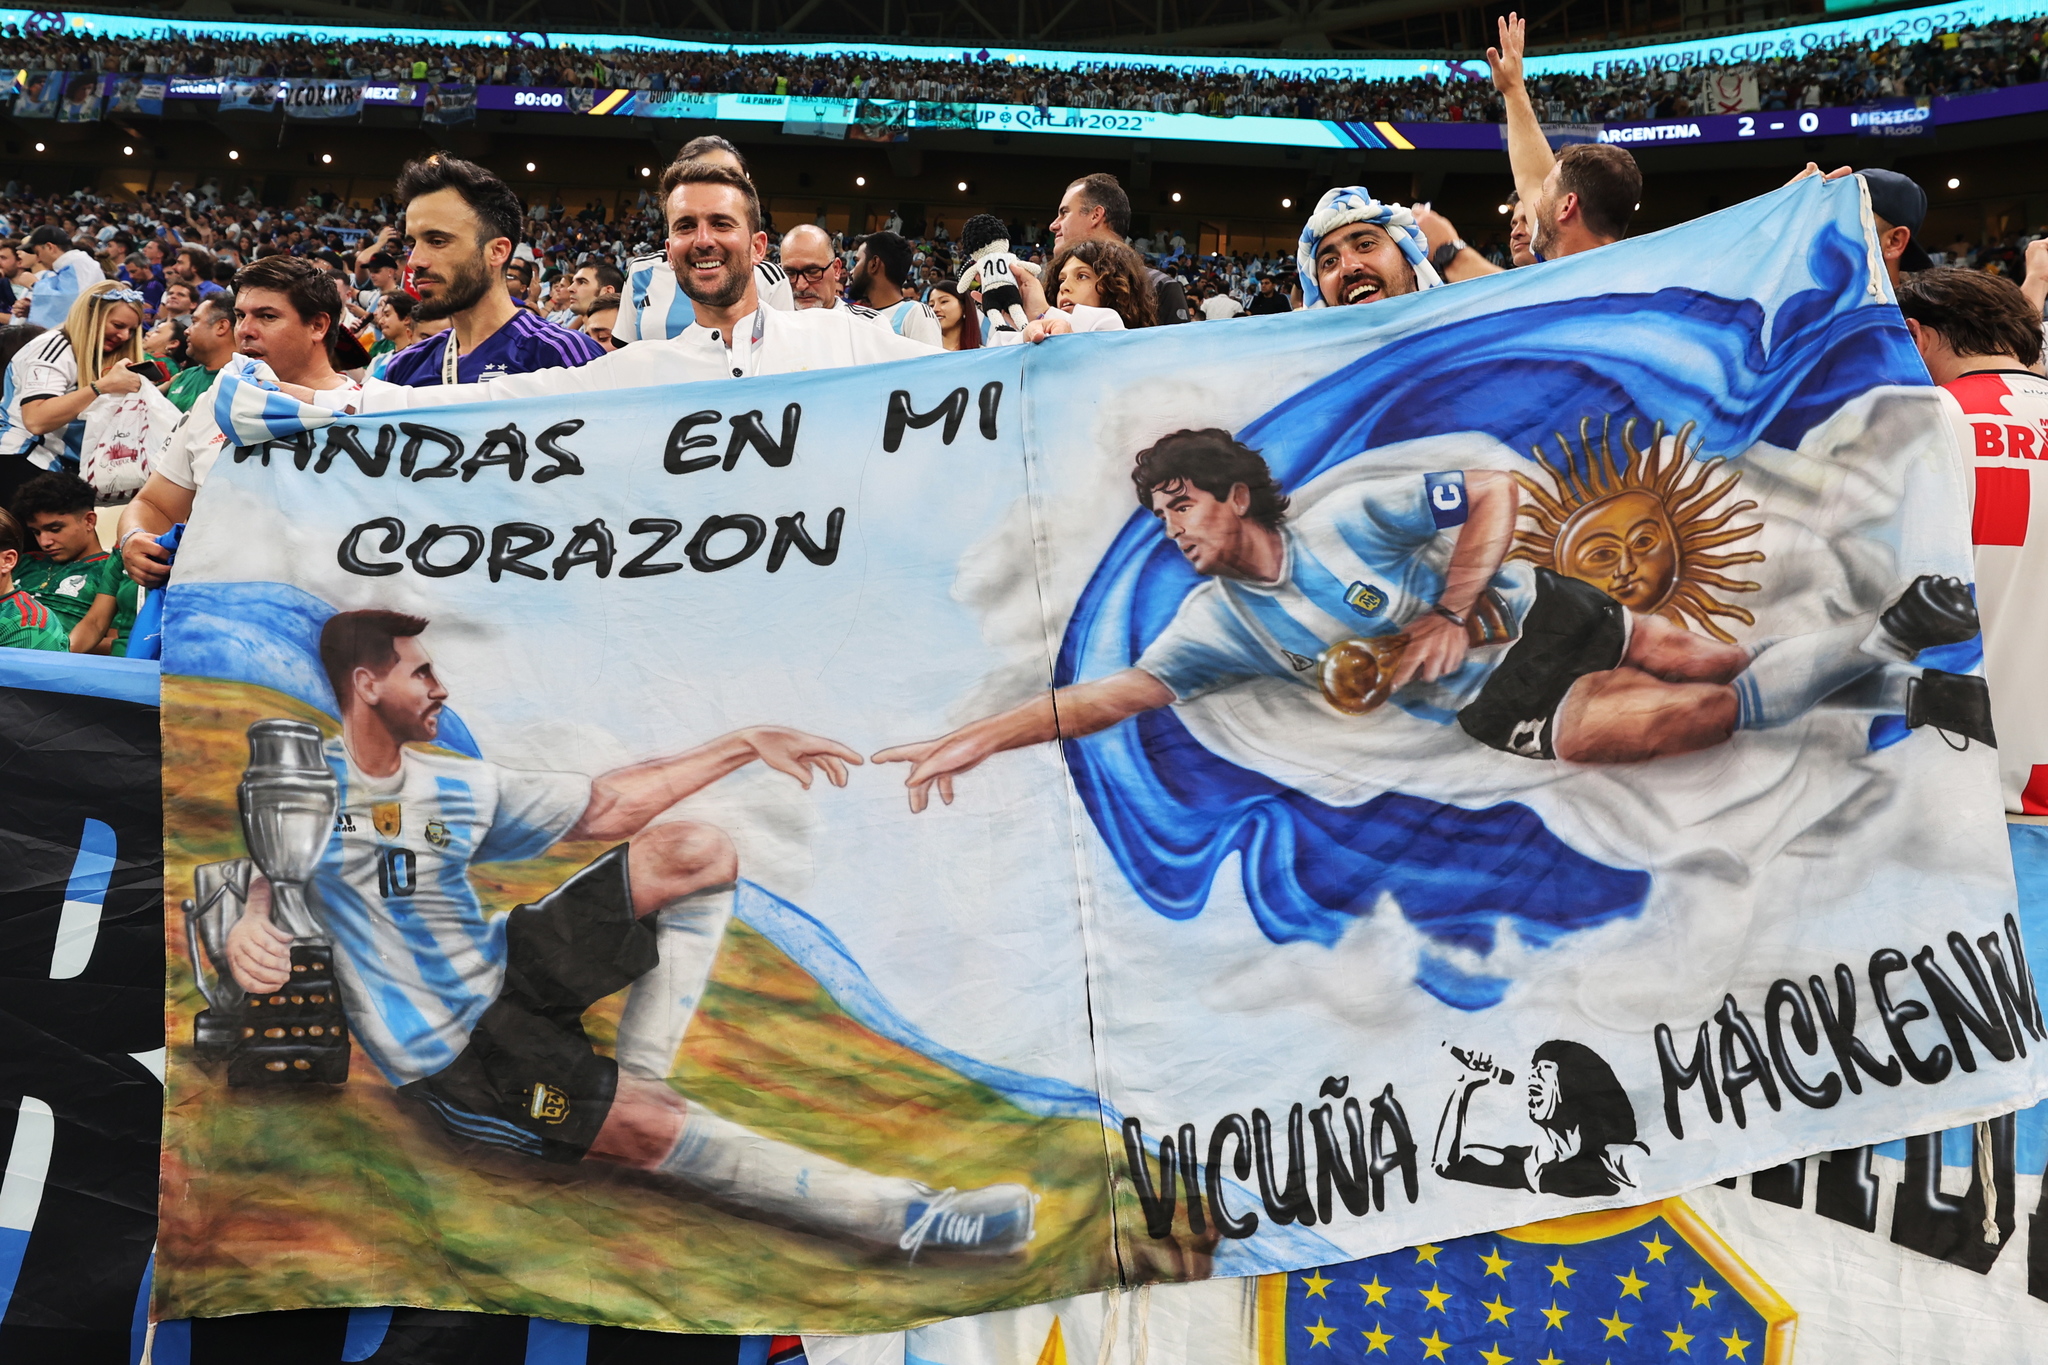 Lusail (Qatar), 26/11/2022.-  lt;HIT gt;Fans lt;/HIT gt; of  lt;HIT gt;Argentina lt;/HIT gt; hold a banner depicting Lionel Messi (L) and Diego Maradona (R) in the manner of Michelangelo's painting 'The Creation of Adam' during the FIFA World Cup 2022 group C soccer match between  lt;HIT gt;Argentina lt;/HIT gt; and Mexico at Lusail Stadium in Lusail, Qatar, 26 November 2022. (Mundial de Fútbol, Estados Unidos, Catar) EFE/EPA/Mohamed Messara